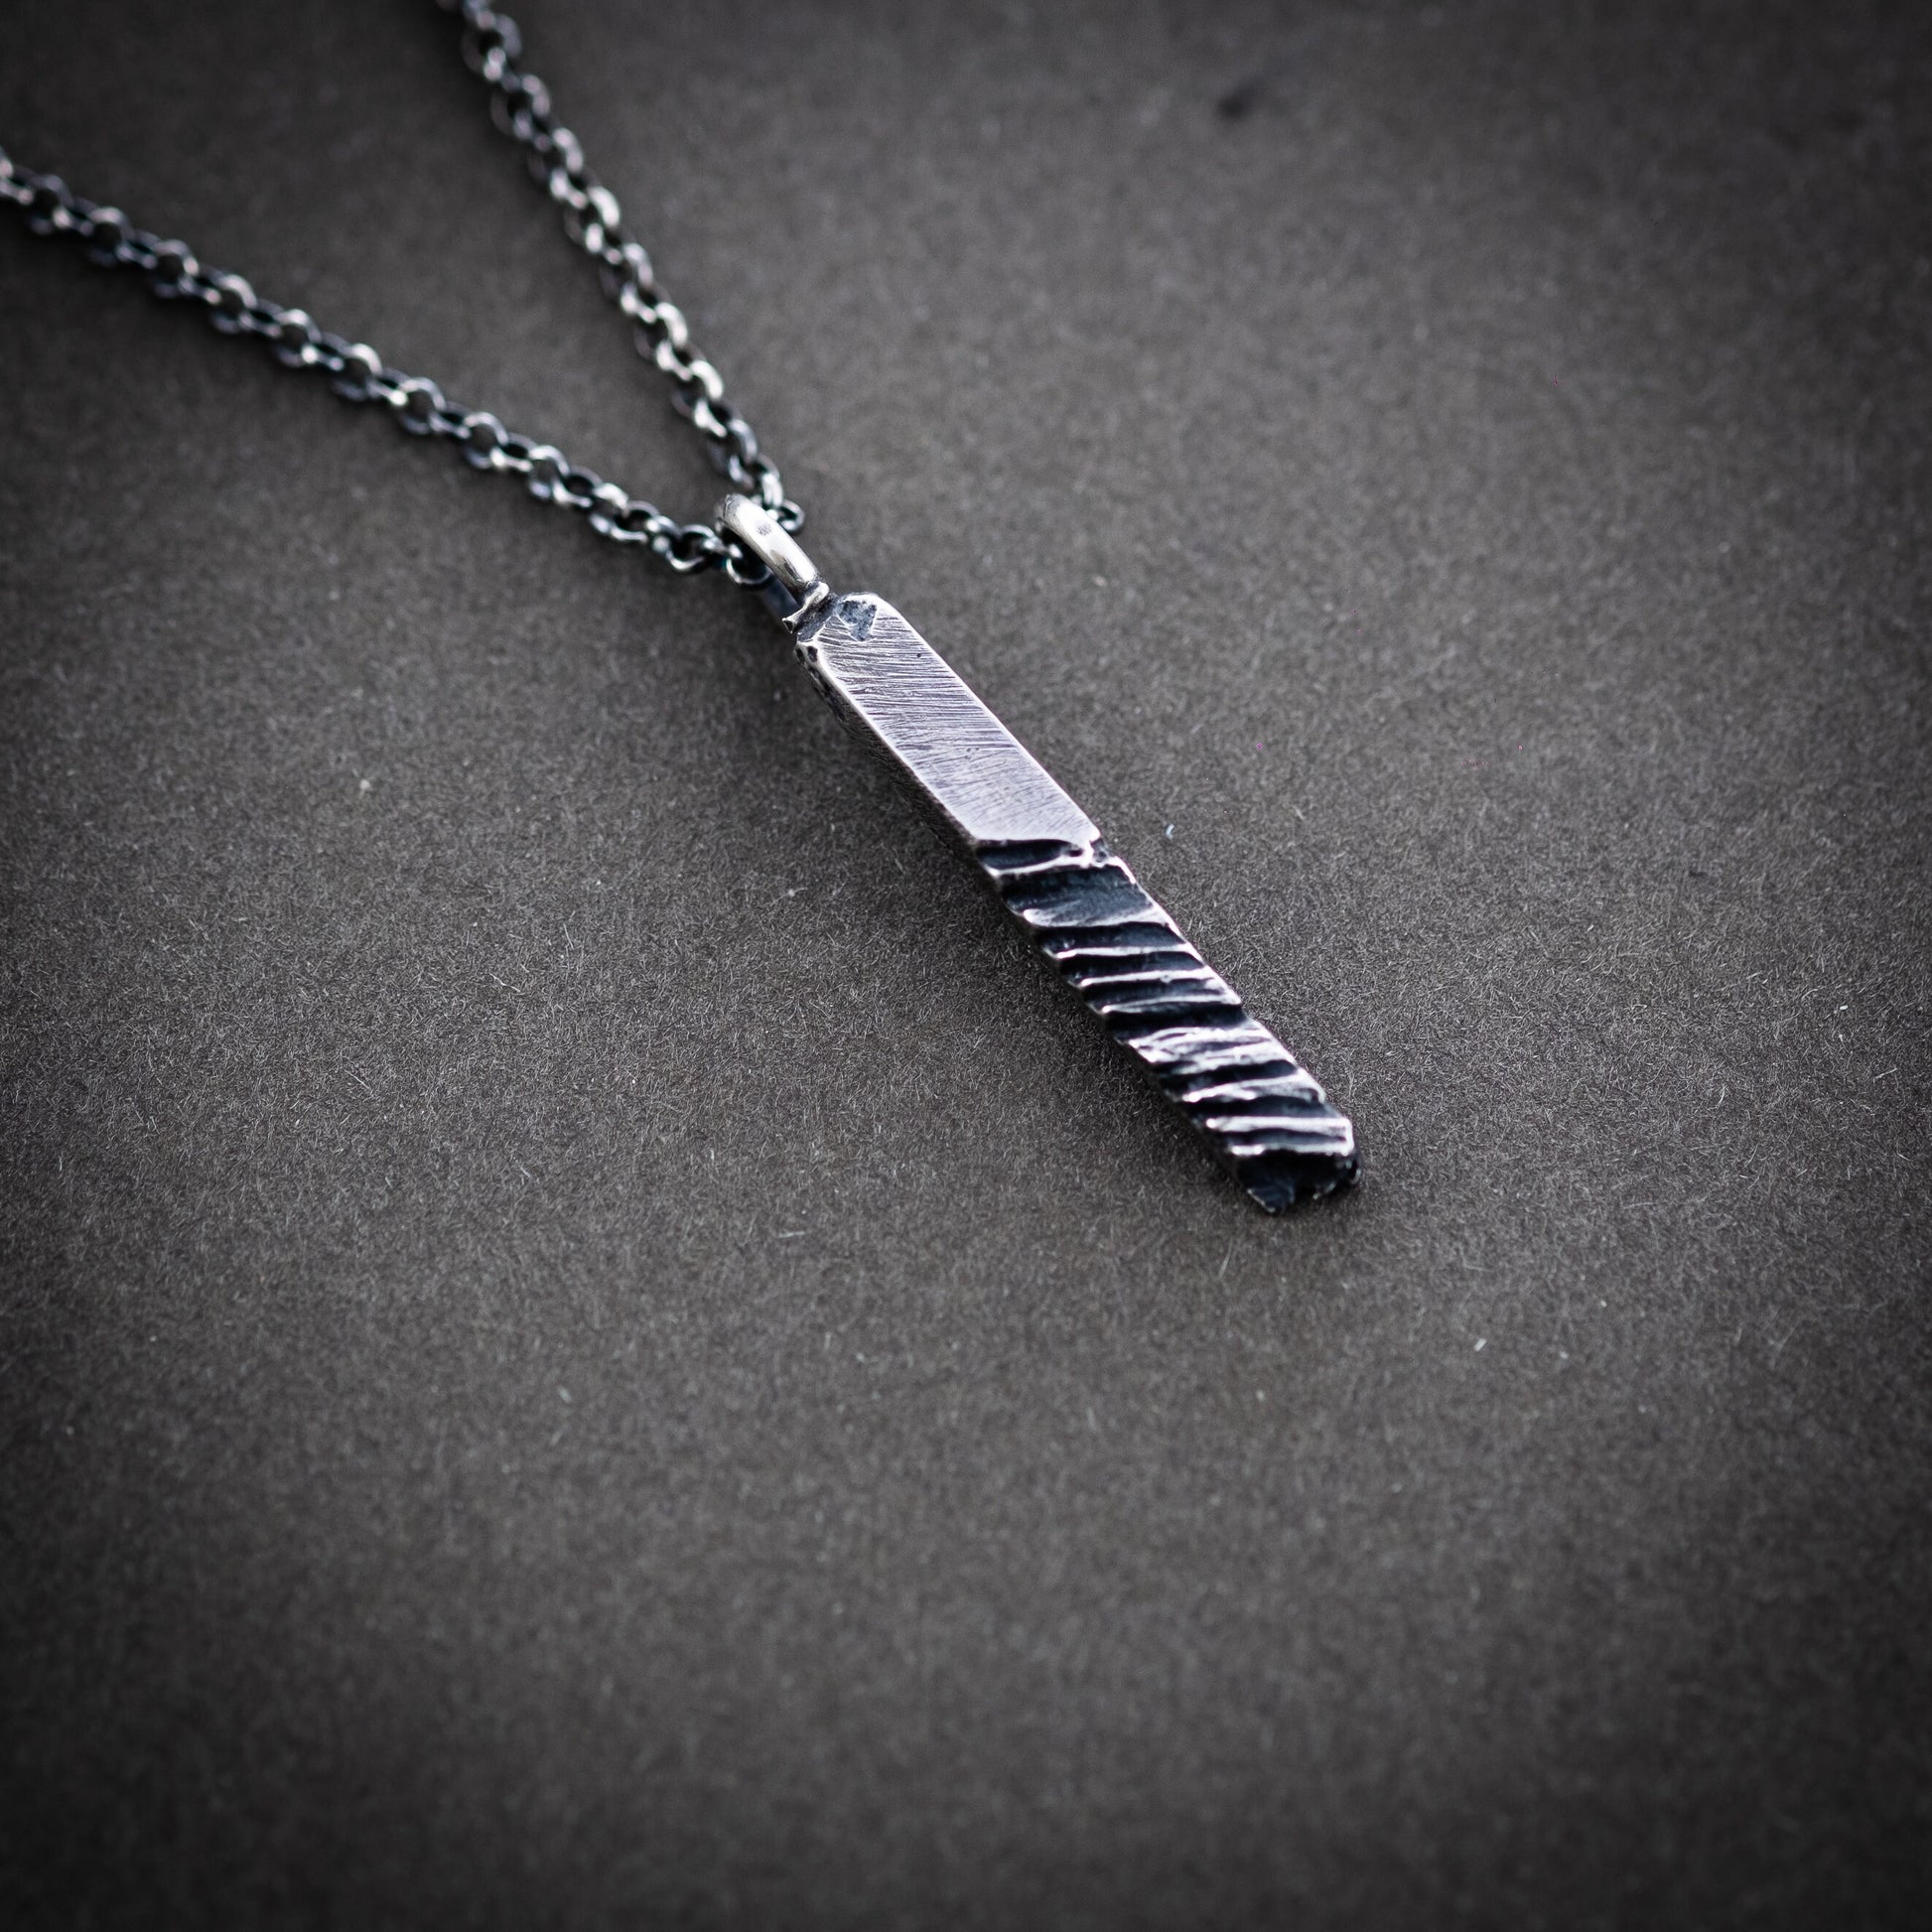 Unique Rustic Silver Bar mens Necklace, Handmade Gotchic Silver jewelry, boyfriend gift, Unique gifts,  Husband gift, Gift for him